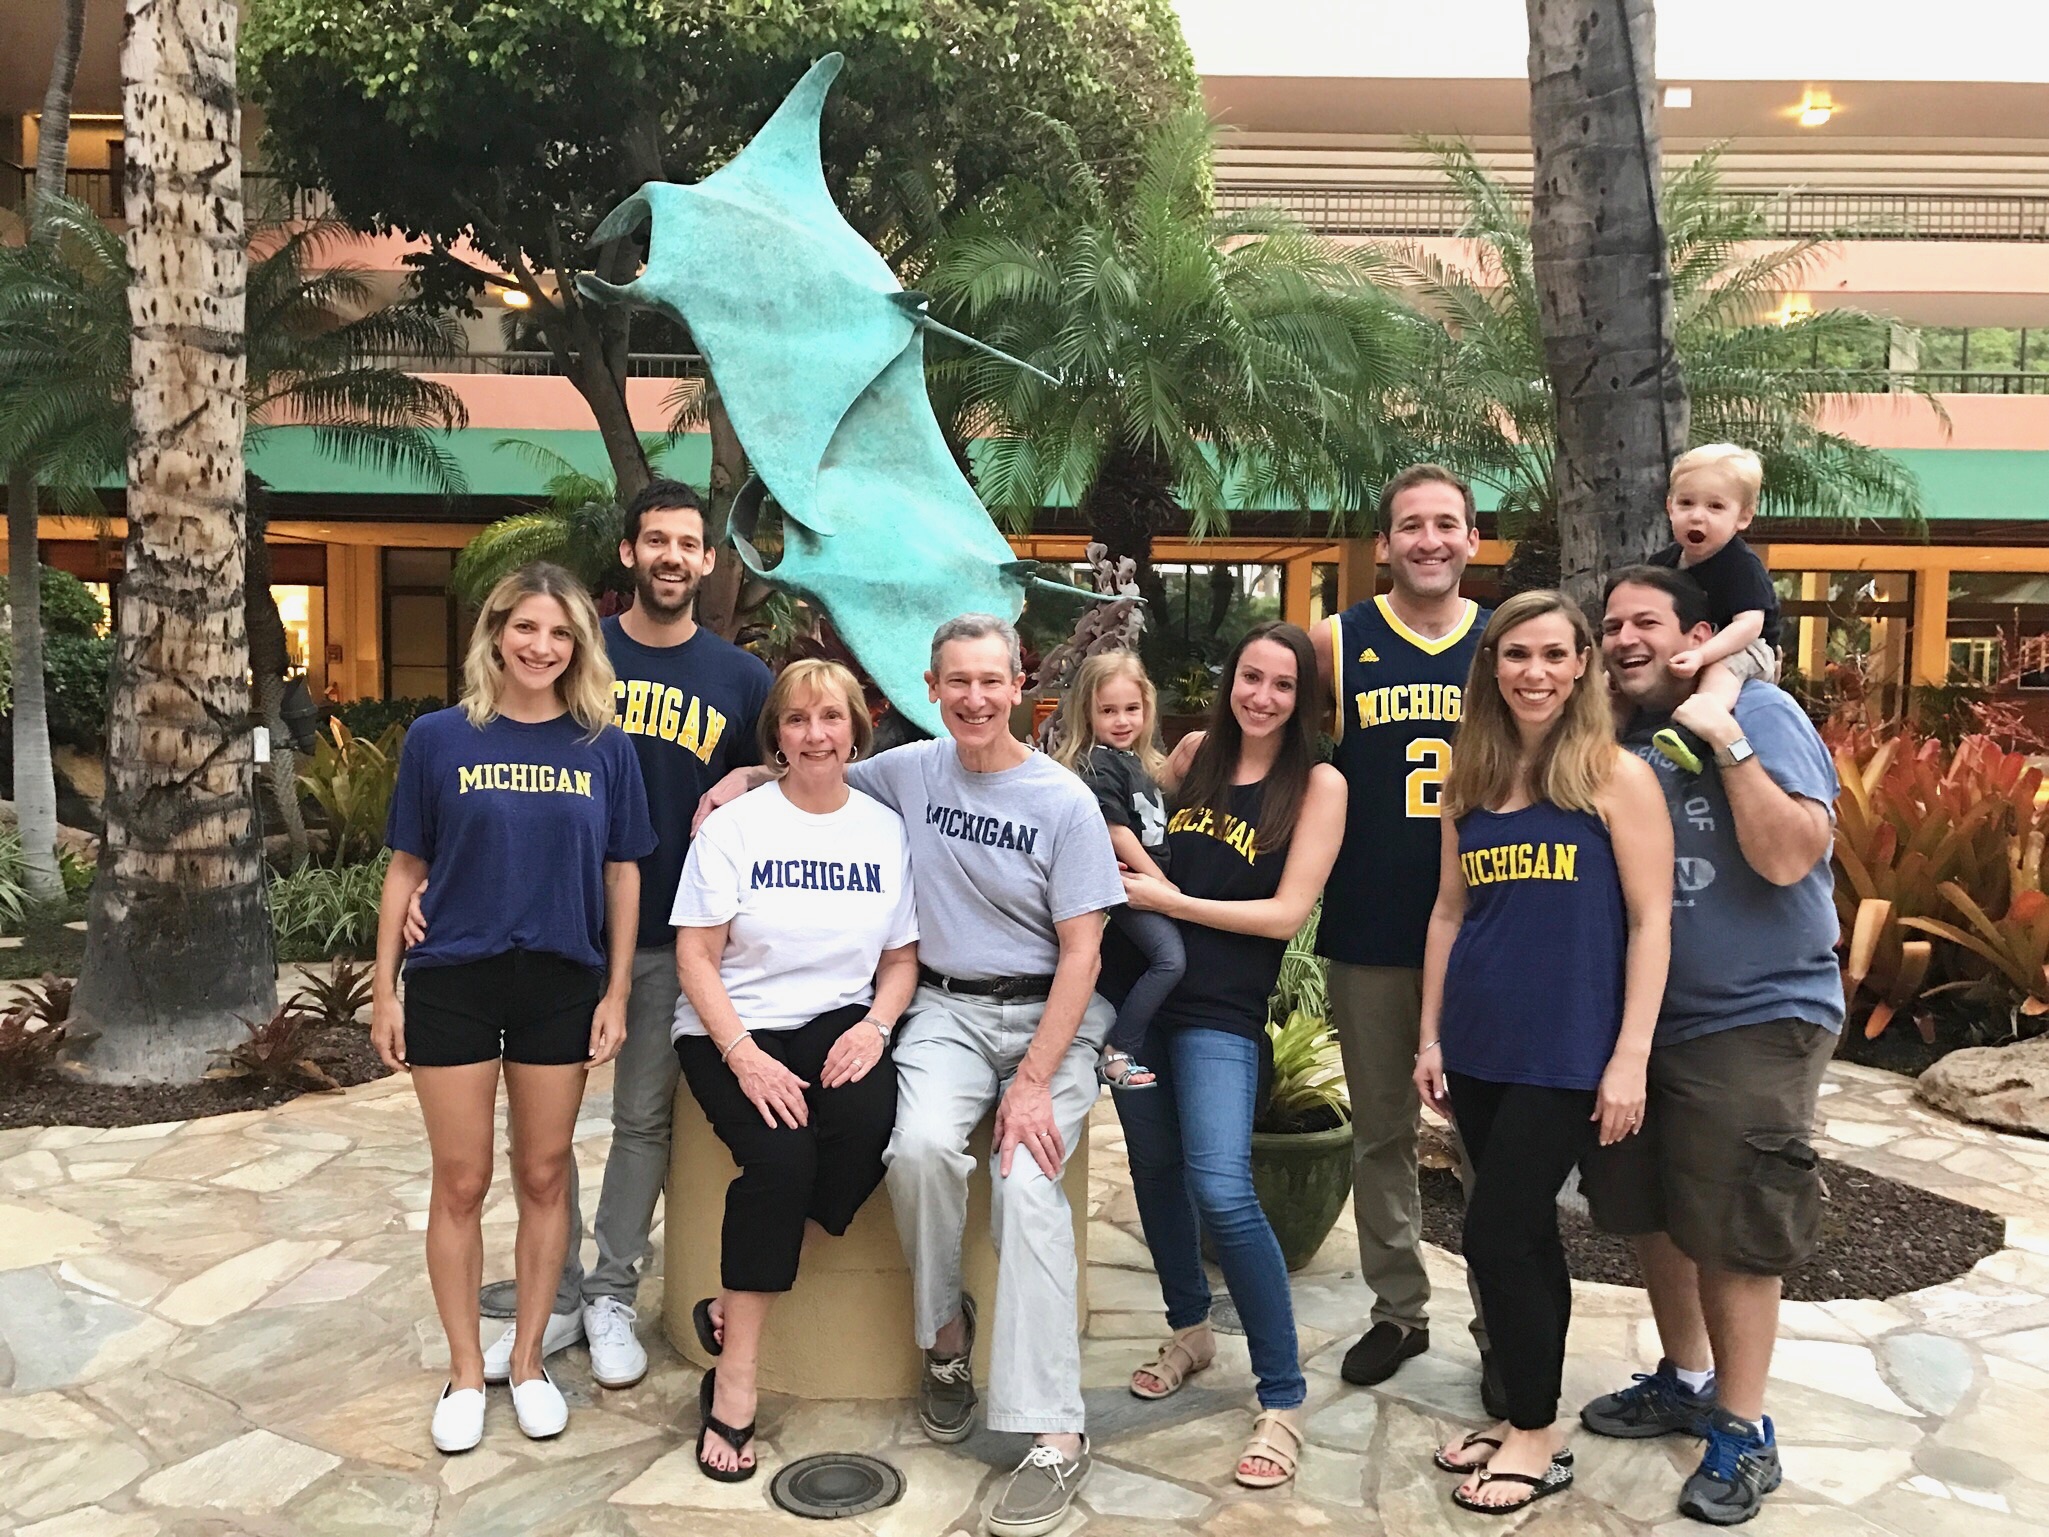 In January 2017, college sweethearts Cathy Cantor, '73, and David Cantor, '74, celebrated their 40th wedding anniversary with their children: Lauren Cantor Bar-Lev, ’03, MD’07; Benjy Bar-Lev, Robert Cantor, ’05; Allison Cantor; Alyssa Cantor Kalisky, ’10, JD’13; and Josh Kalisky, ’11, in Maui, Hawaii. Future wolverines, Sammie and Jake Bar-Lev, were also there to celebrate.